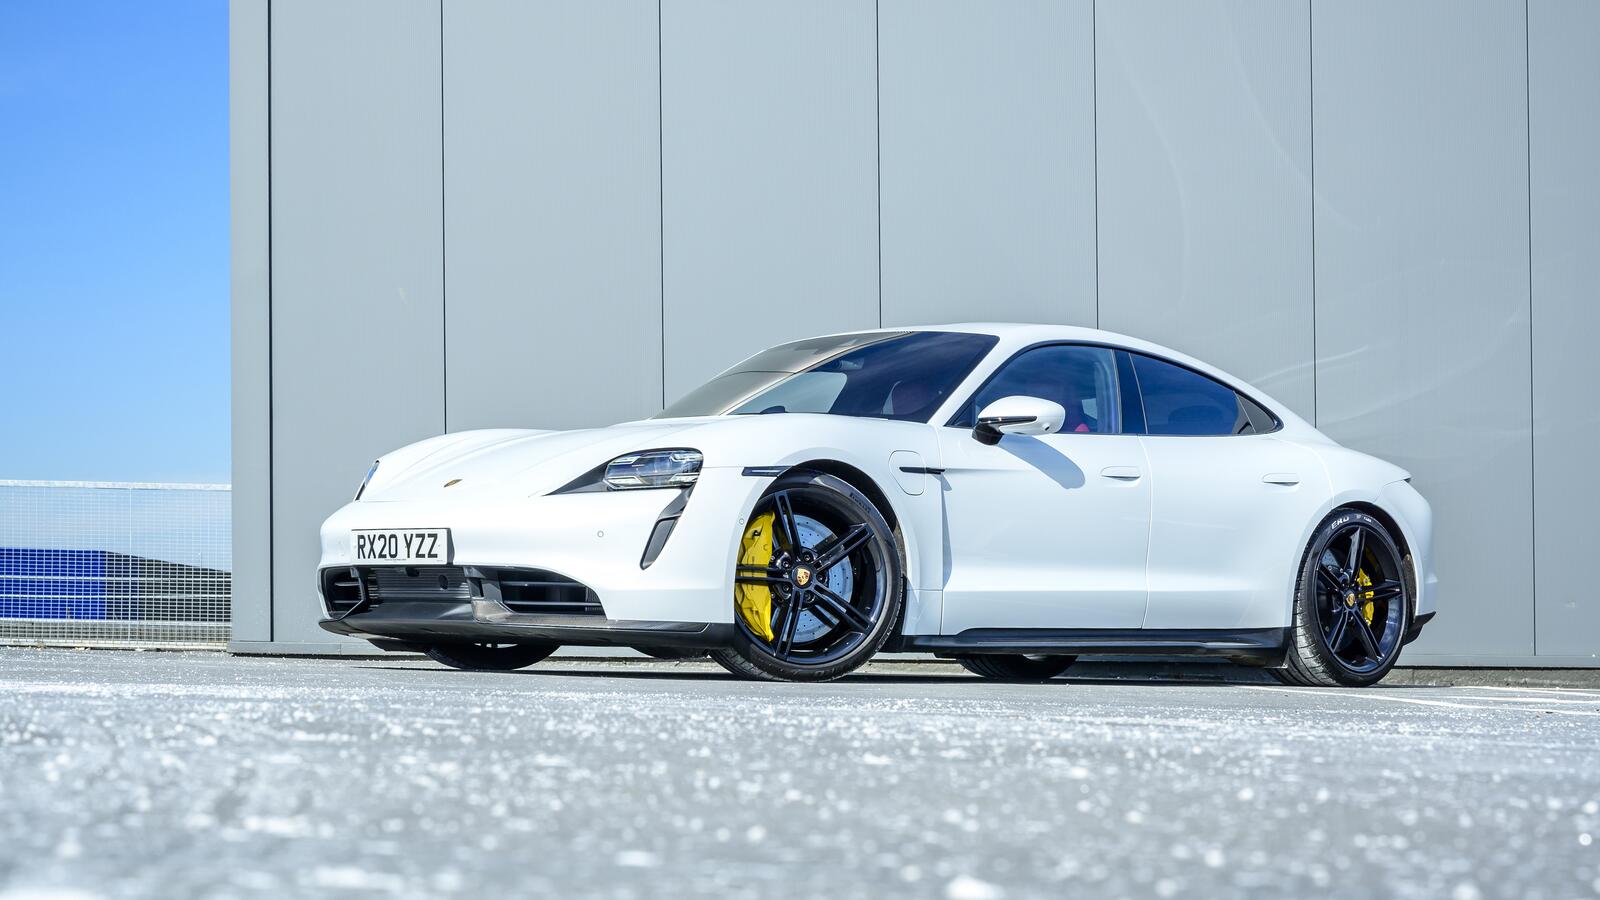 Free photo White porsche taycan surbo s with yellow calipers